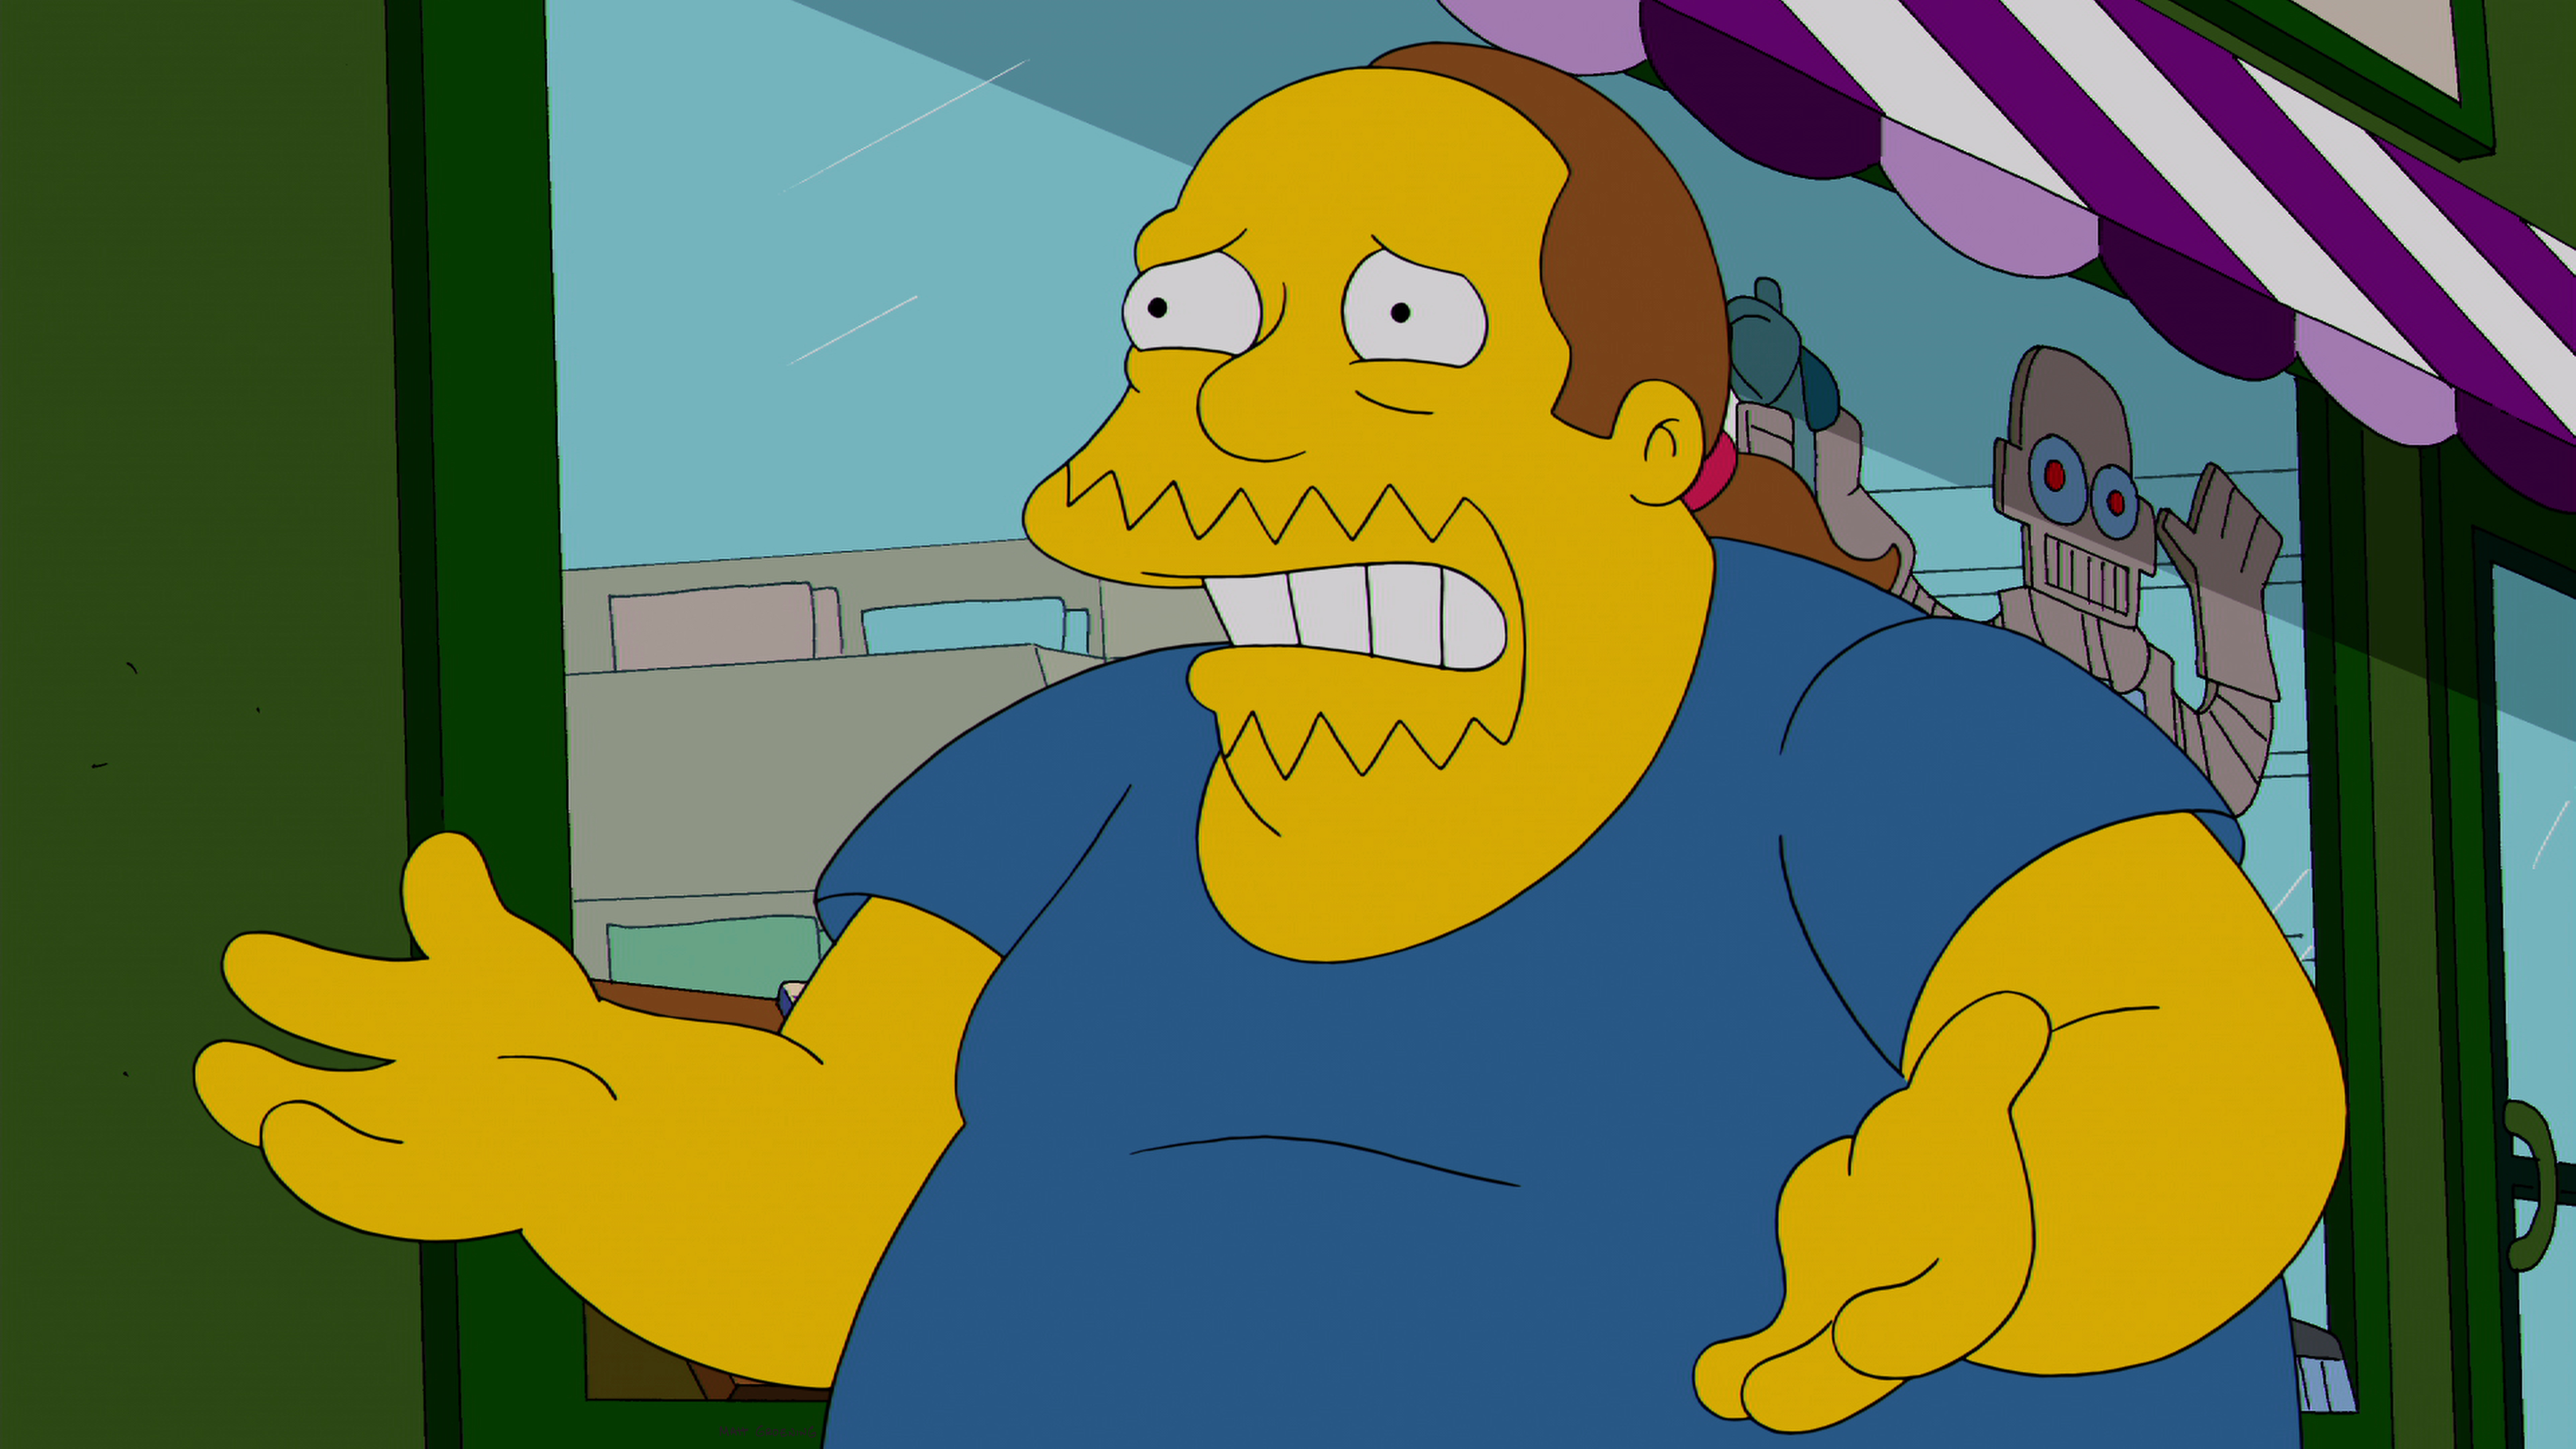 Comic Book Guy of The Simpsons (FOX)